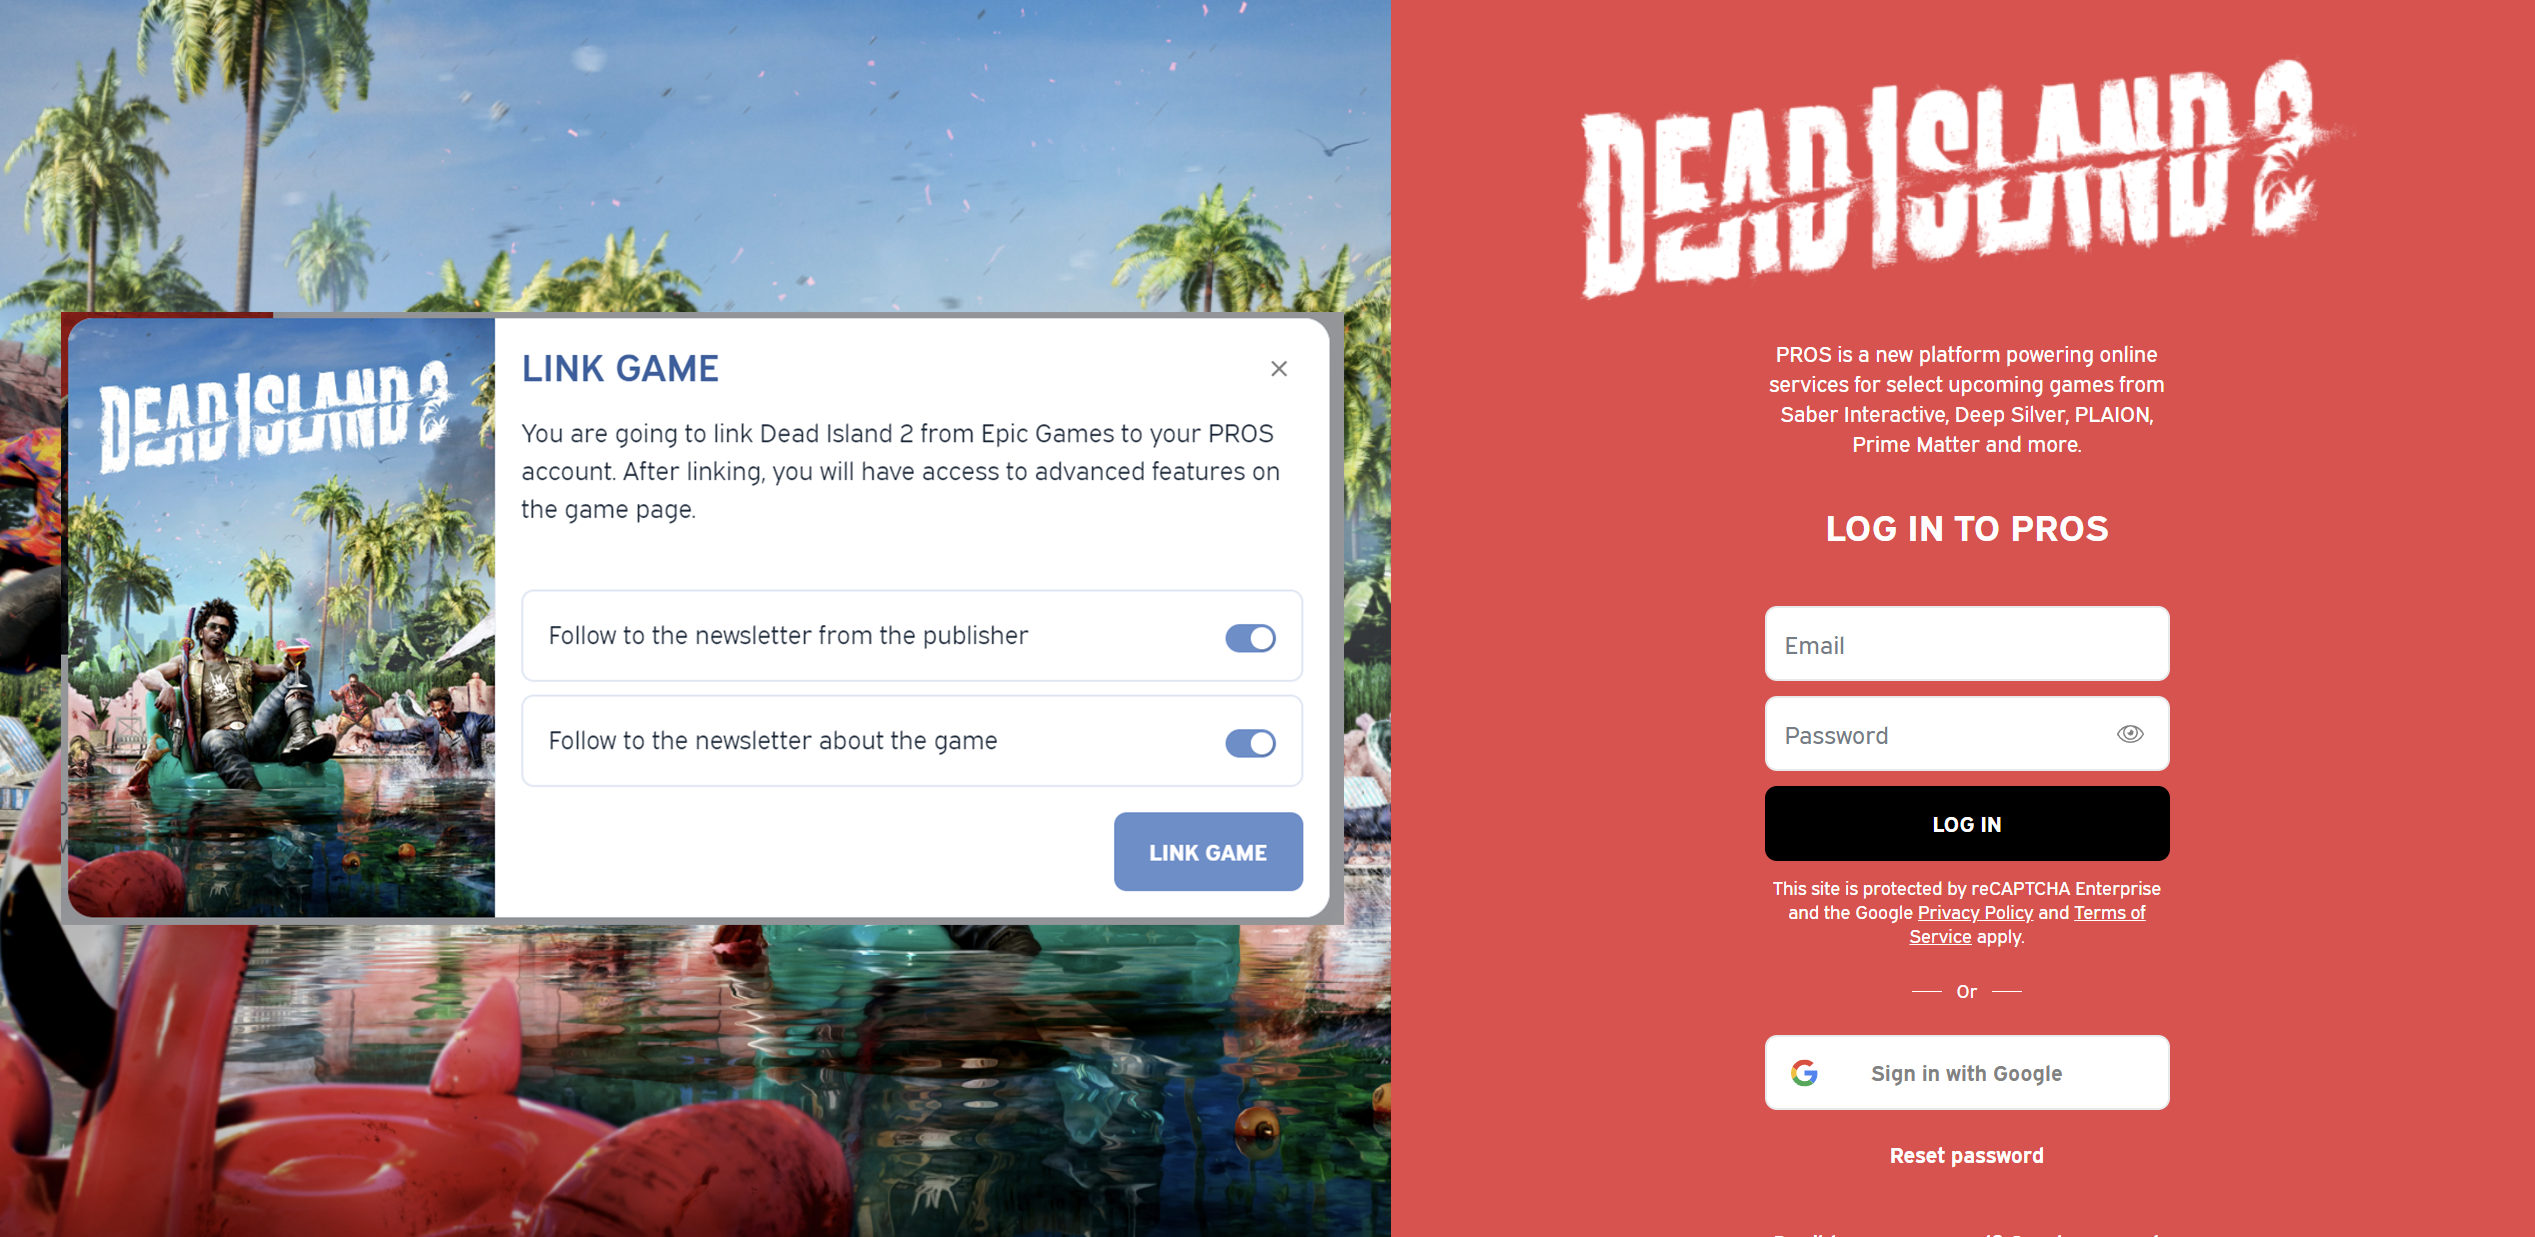 How to complete Like and Follow in Dead Island 2